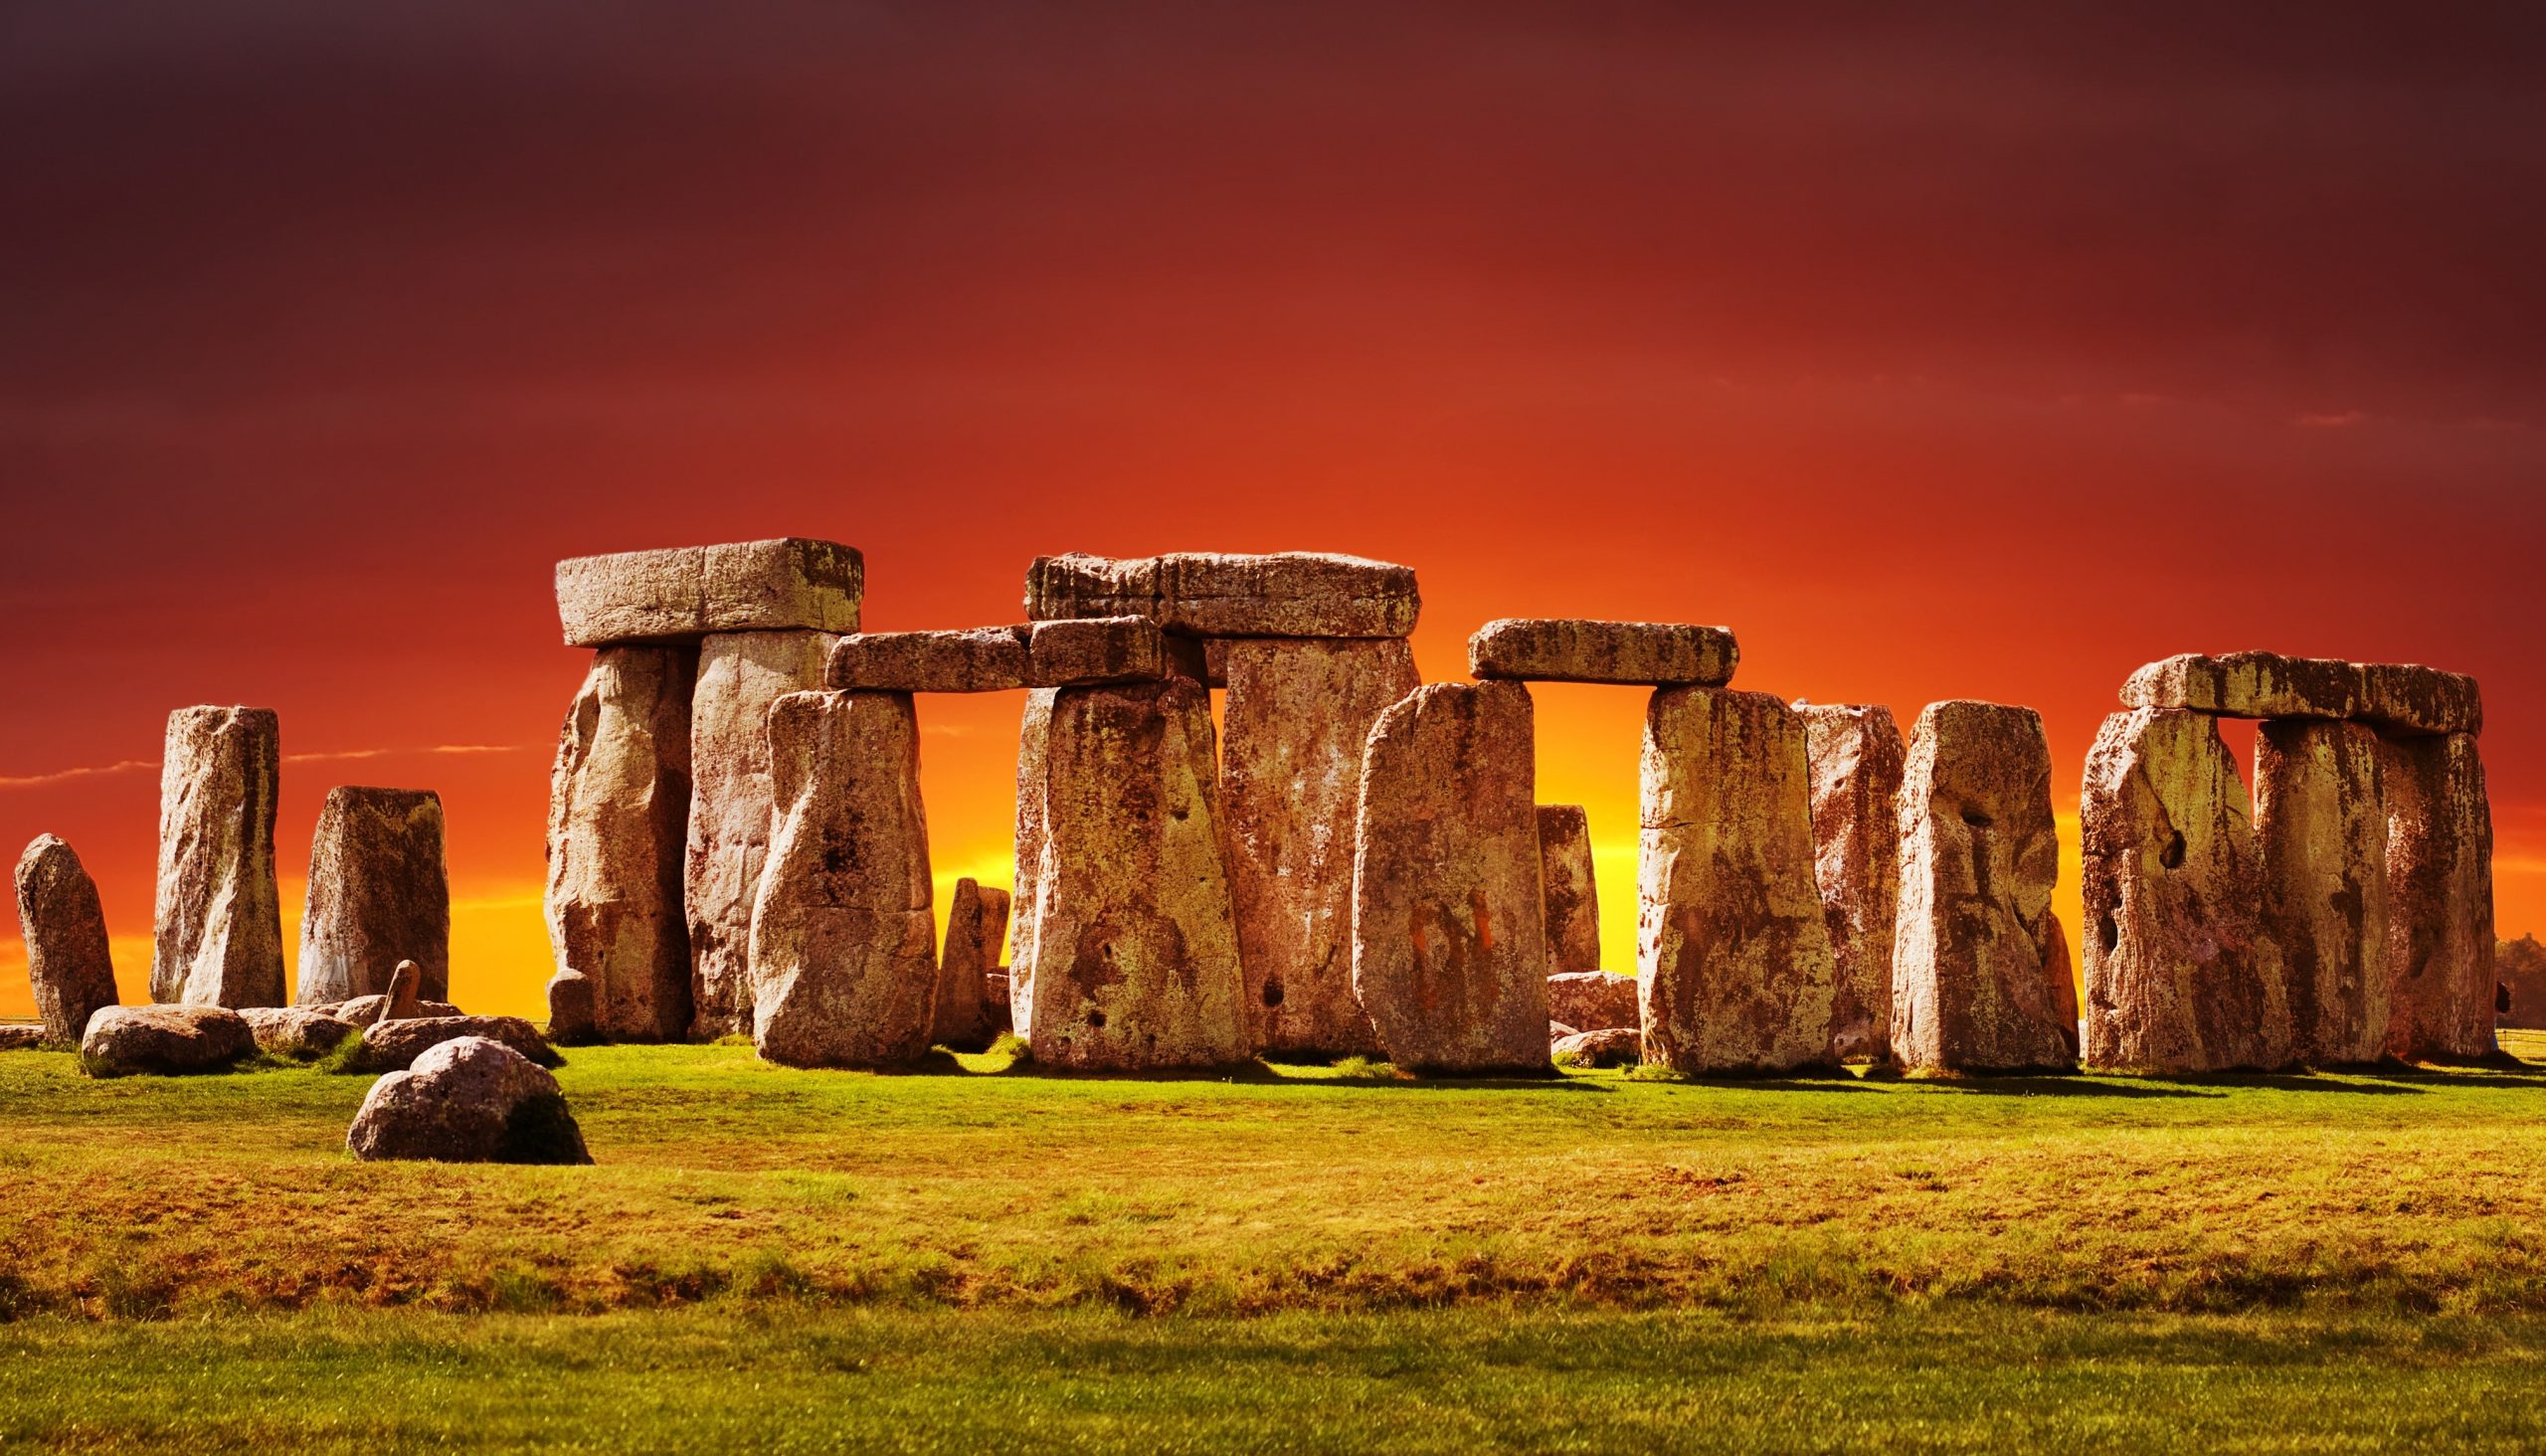 Stonehenge might have been used as a calendar in ancient times. Credit: DepositPhotos